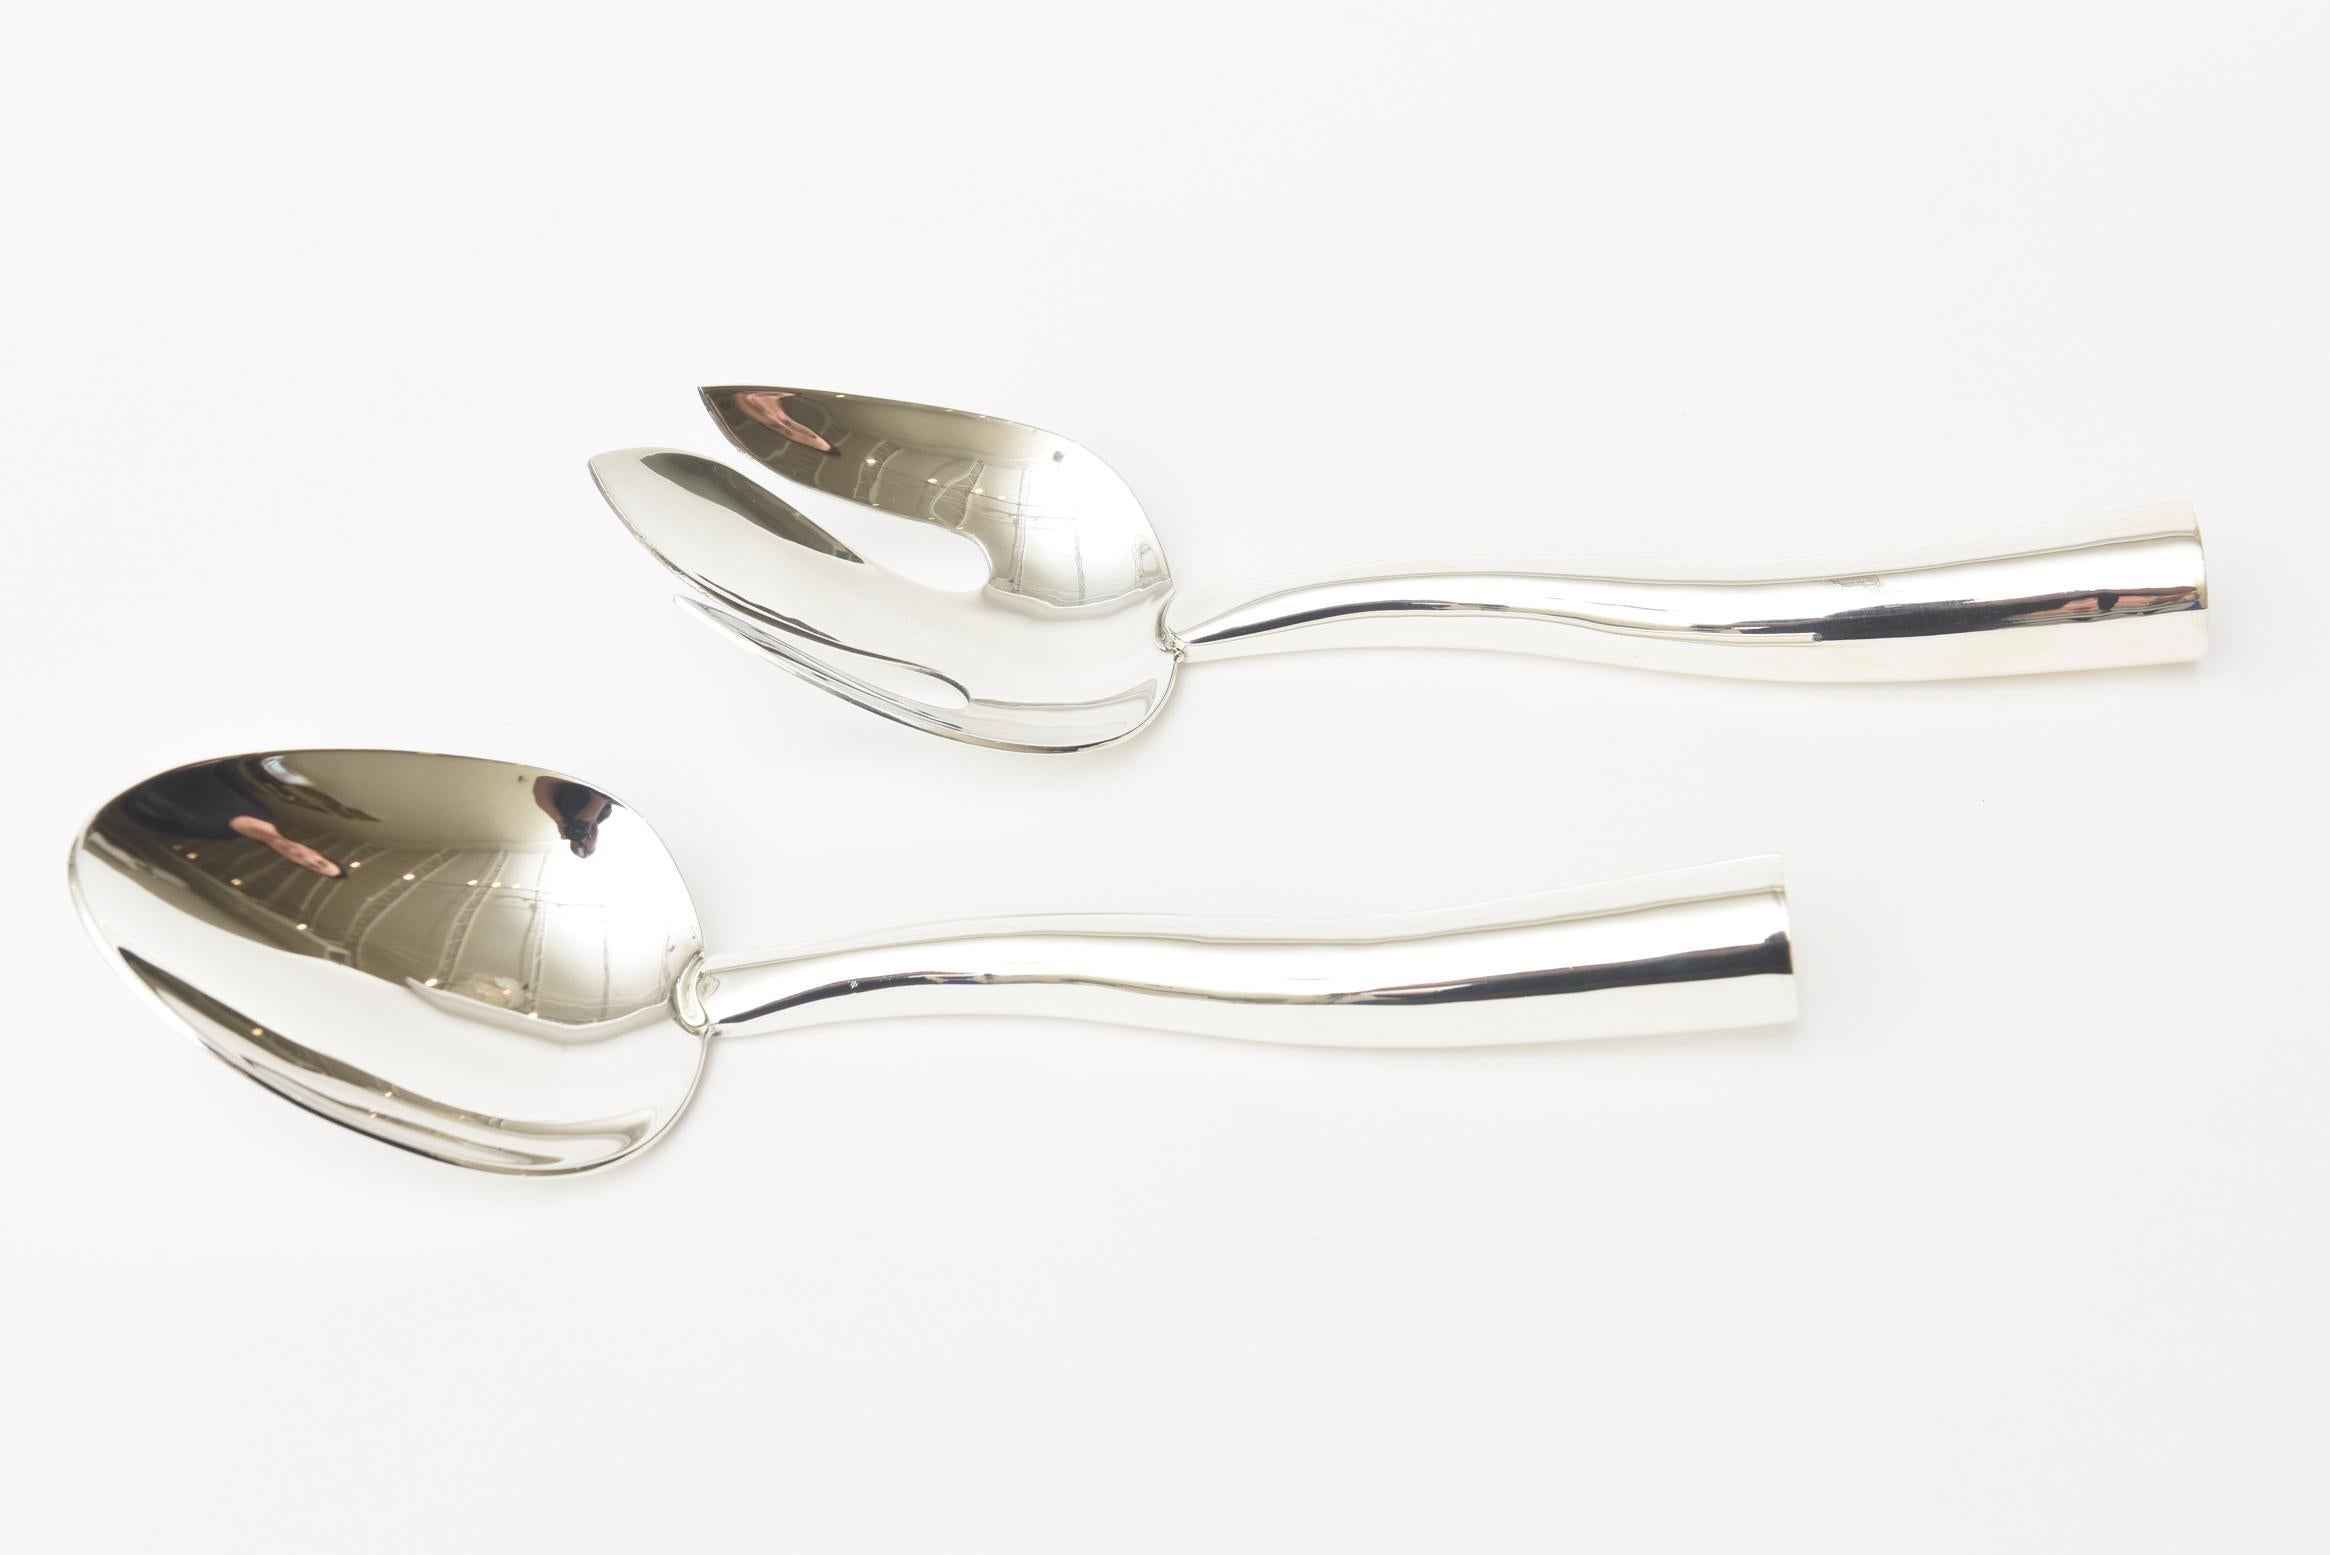 These stunning and sculptural sterling silver modernist vintage sterling silver salad servers and or serving pieces are by Antonio Lopez. They are Mid-Century Modern from the 1960s. They are signed 